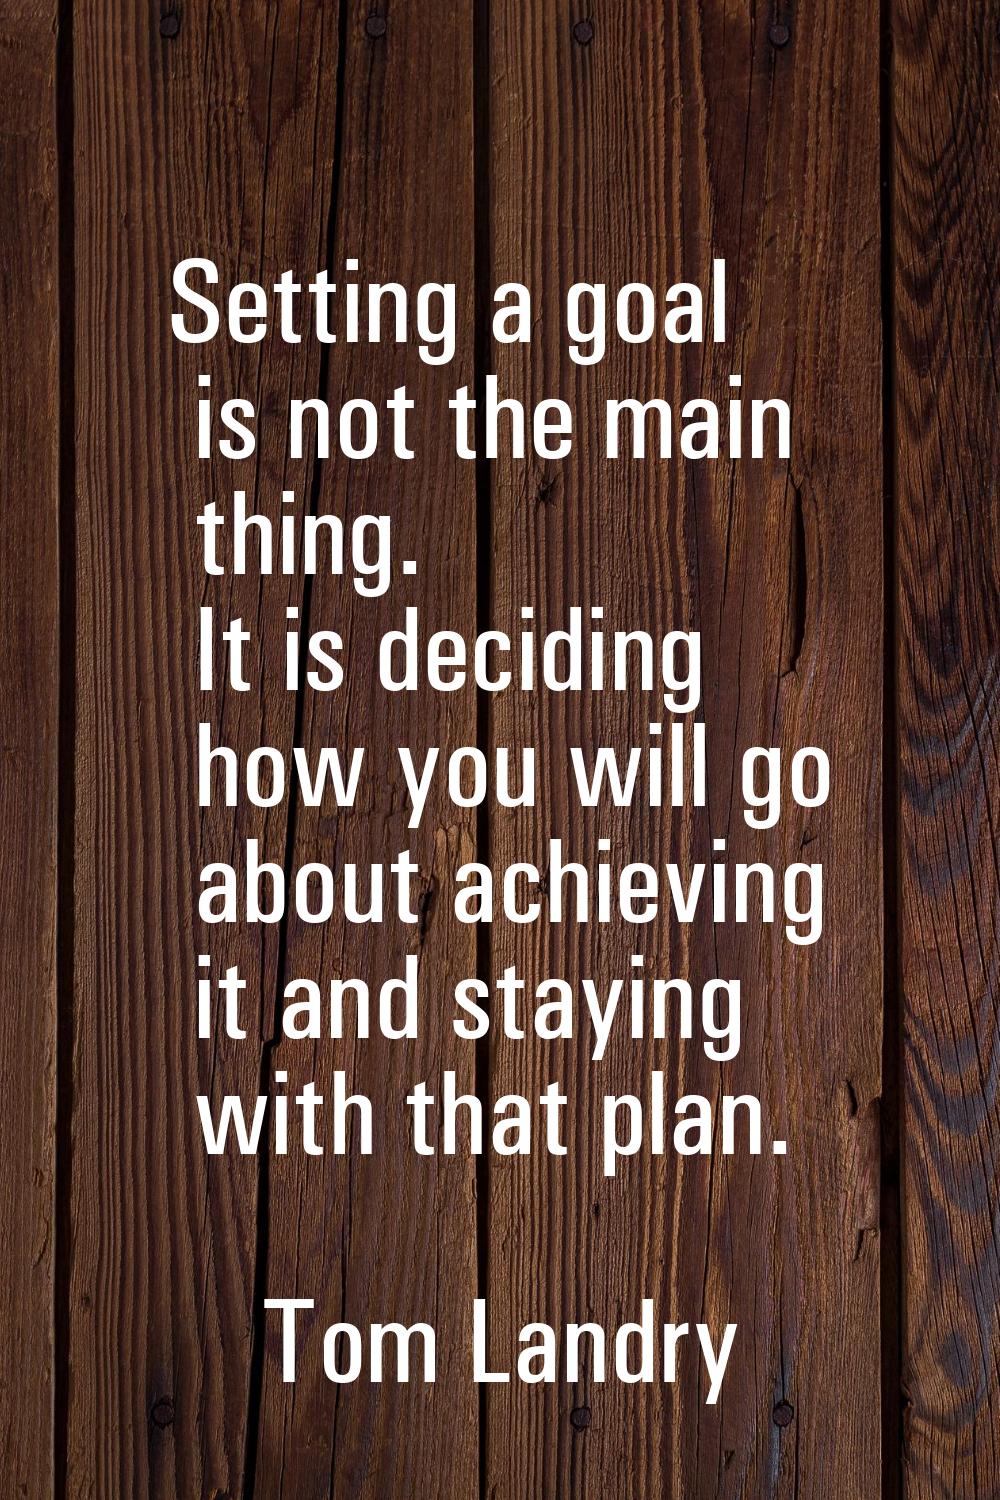 Setting a goal is not the main thing. It is deciding how you will go about achieving it and staying